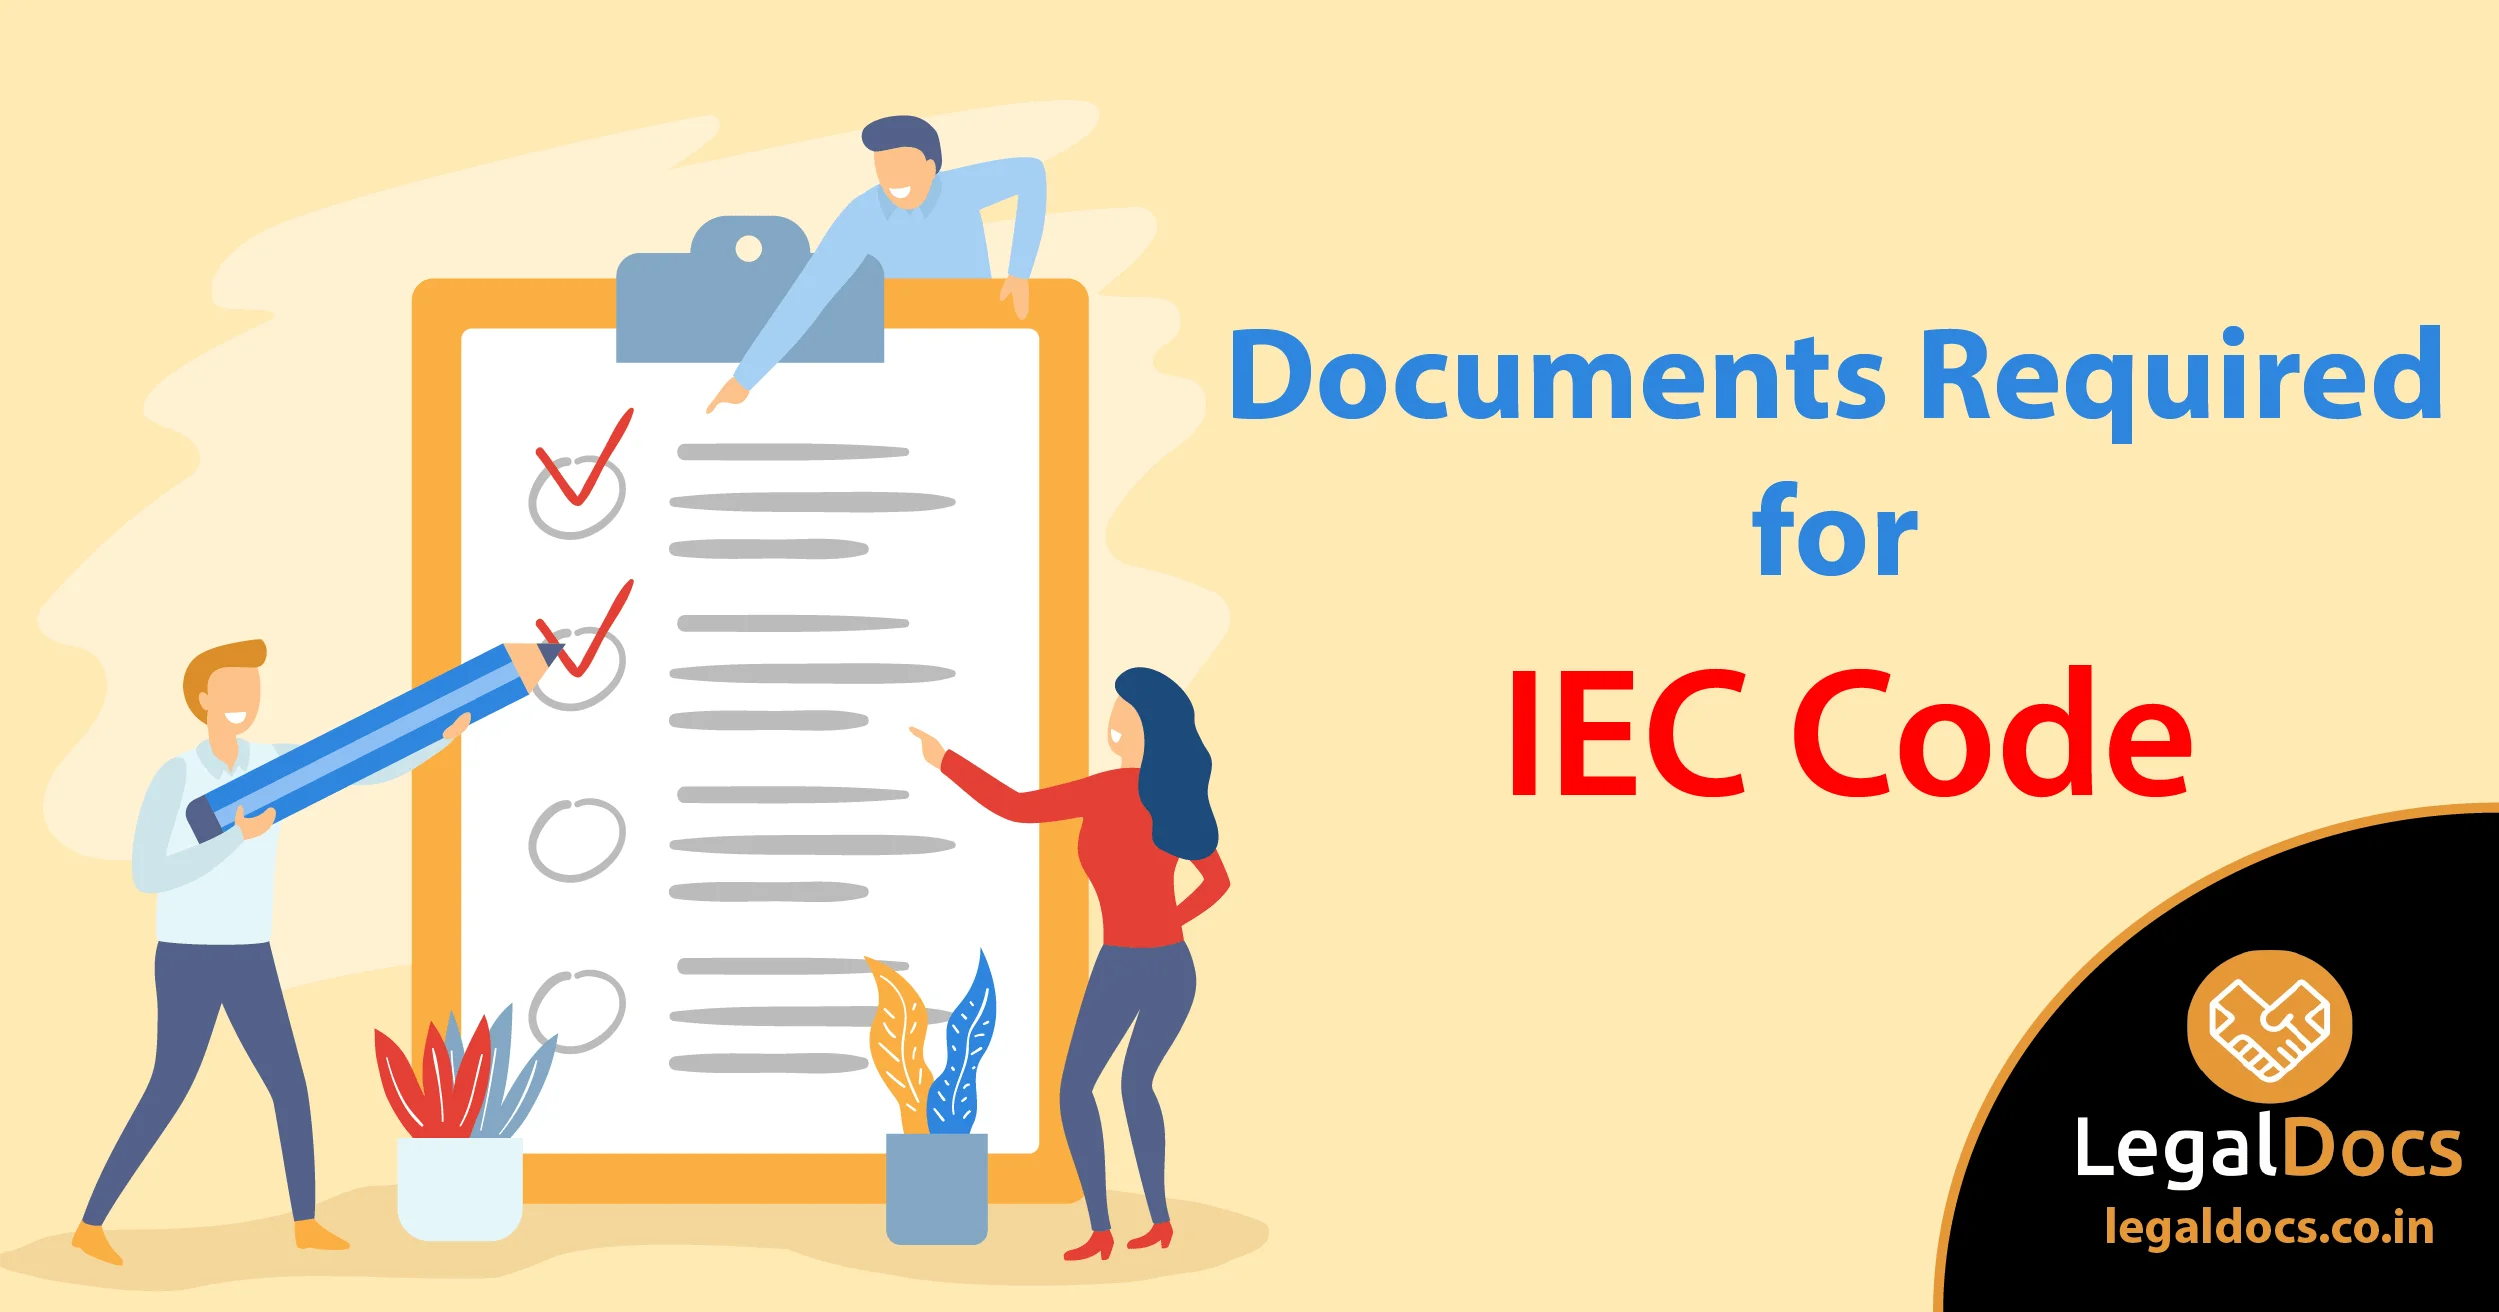 Documents Required for IEC Code